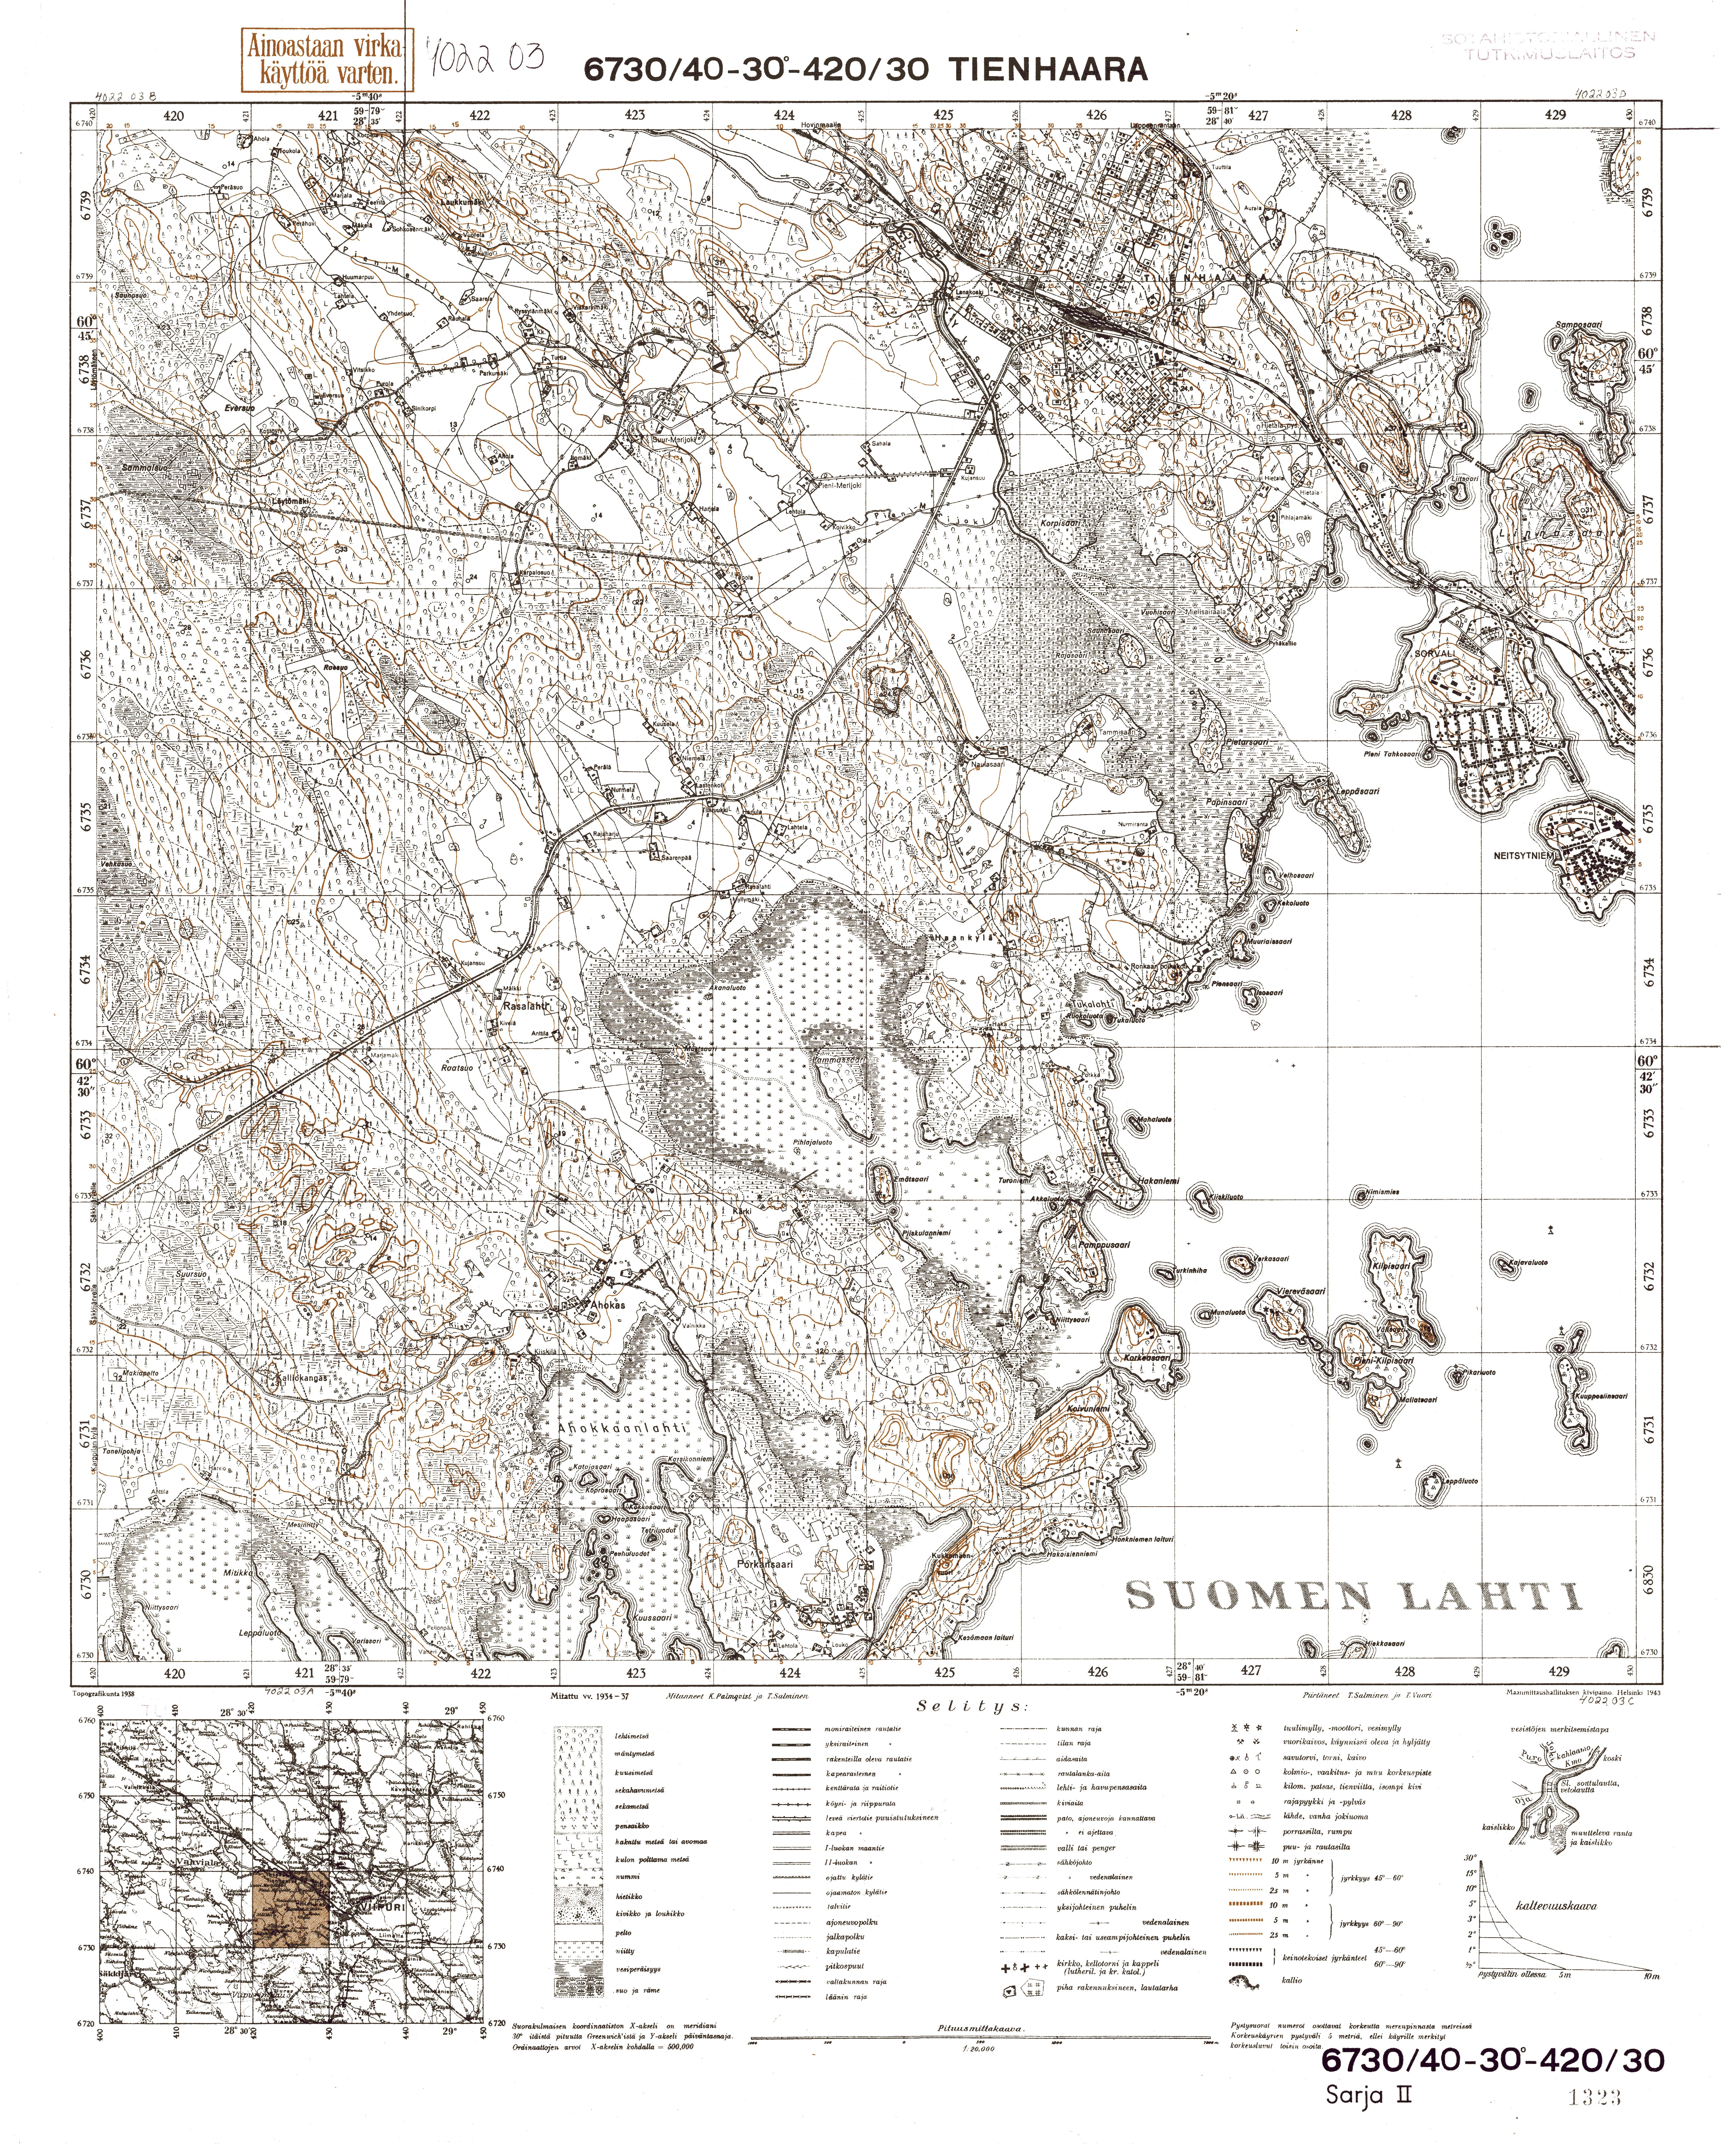 Seleznjovo. Tienhaara. Topografikartta 402203. Topographic map from 1938. Use the zooming tool to explore in higher level of detail. Obtain as a quality print or high resolution image